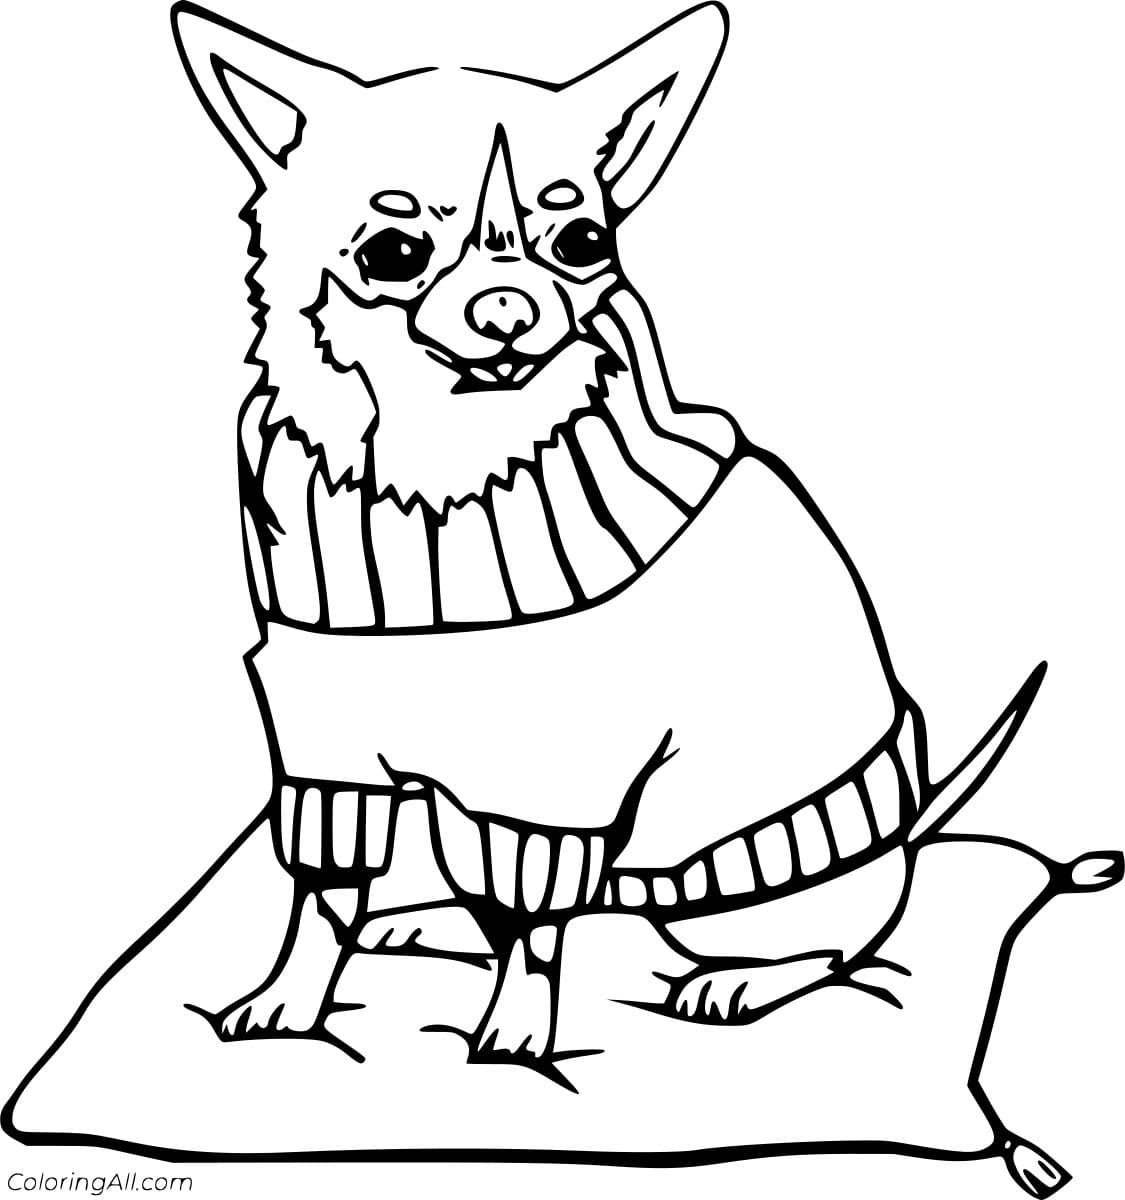 Chihuahua On The Rug Coloring Page